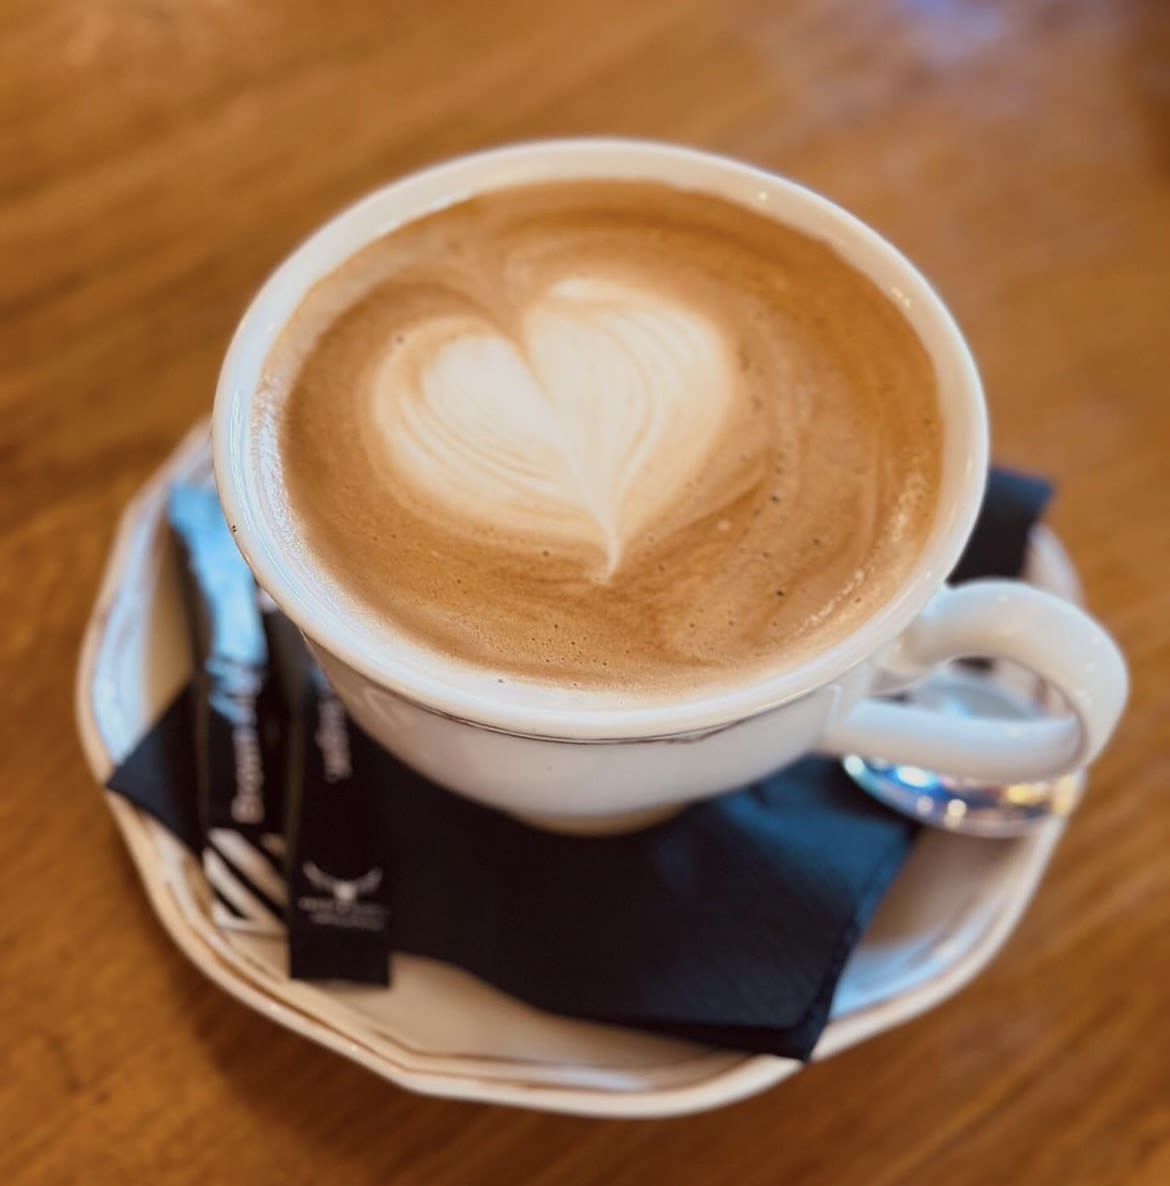 Perfect start to the week! 
See you tomorrow 

#theladbrokearms #theladbrokearmscoffee #ladbrokearmspub #ladbrokearmsperfectplace #mondaylunch #nooncoffee #wakeup #